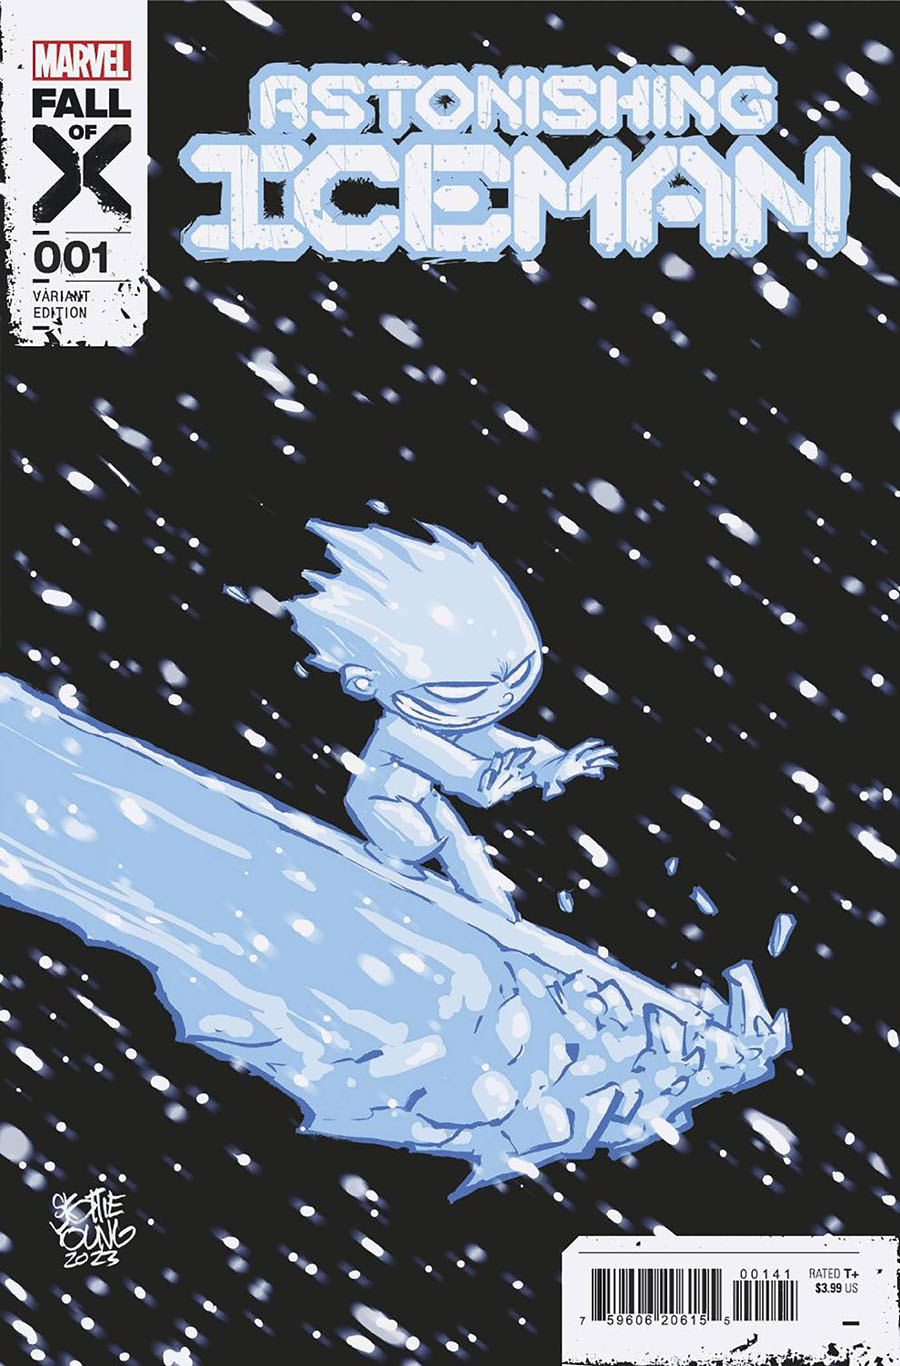 Astonishing Iceman #1 Cover D Variant Skottie Young Cover (Fall Of X Tie-In)